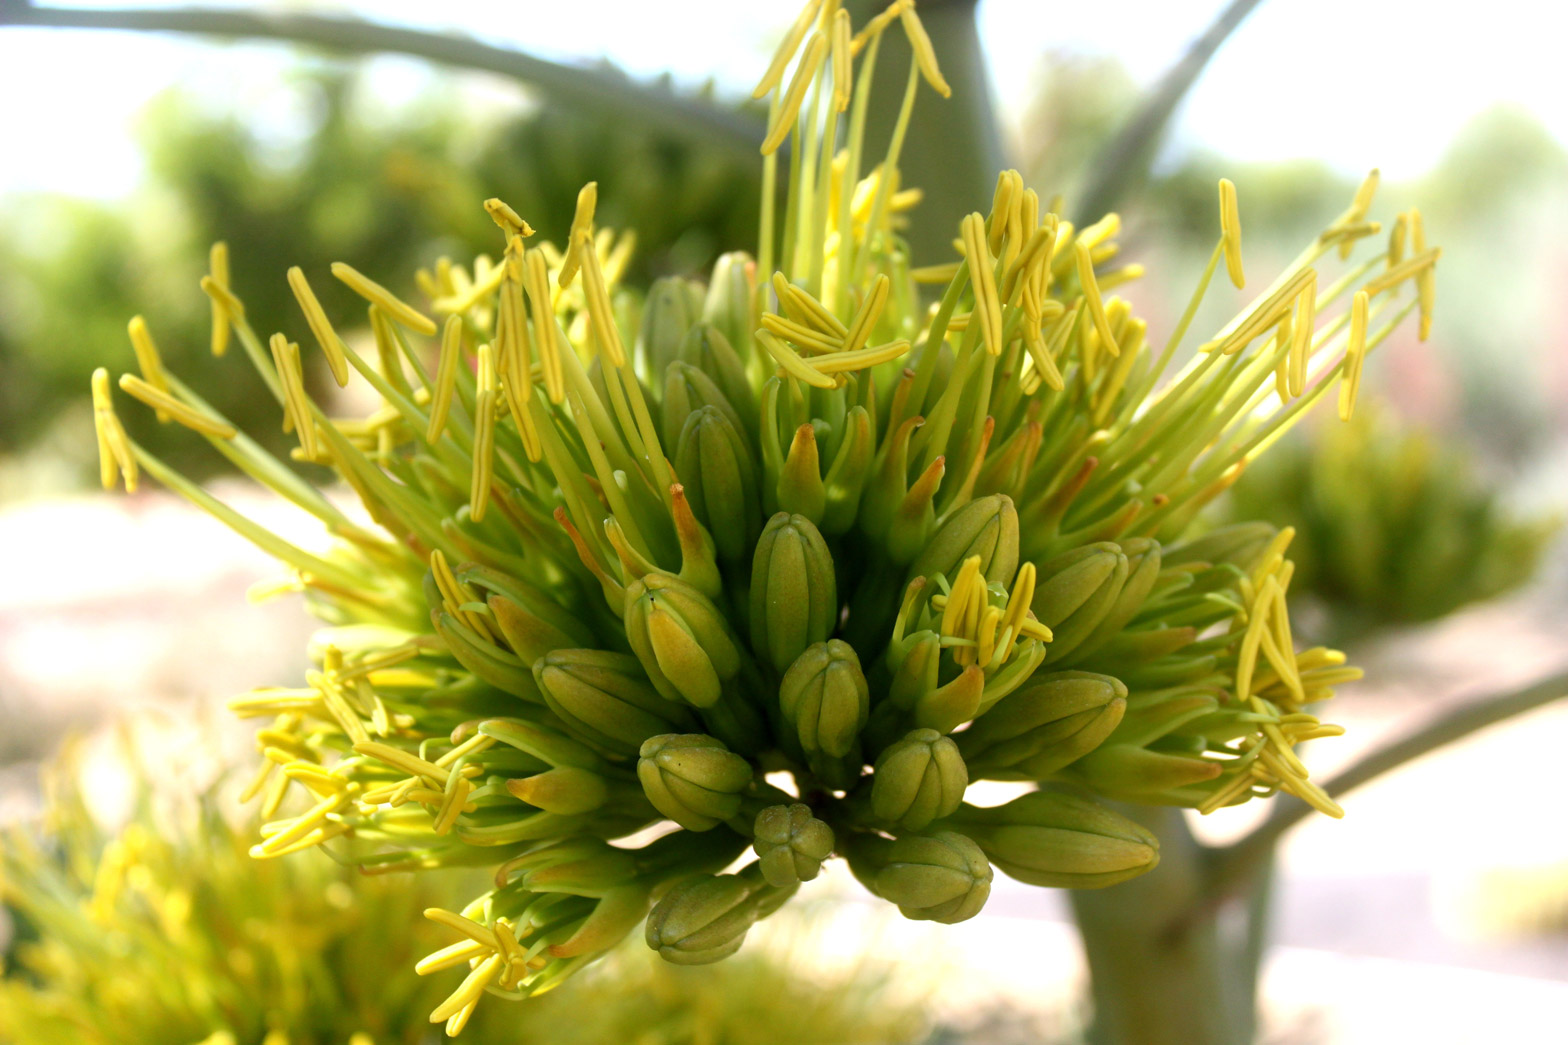 A close-up of the yellow flowers of the Smooth Agave.